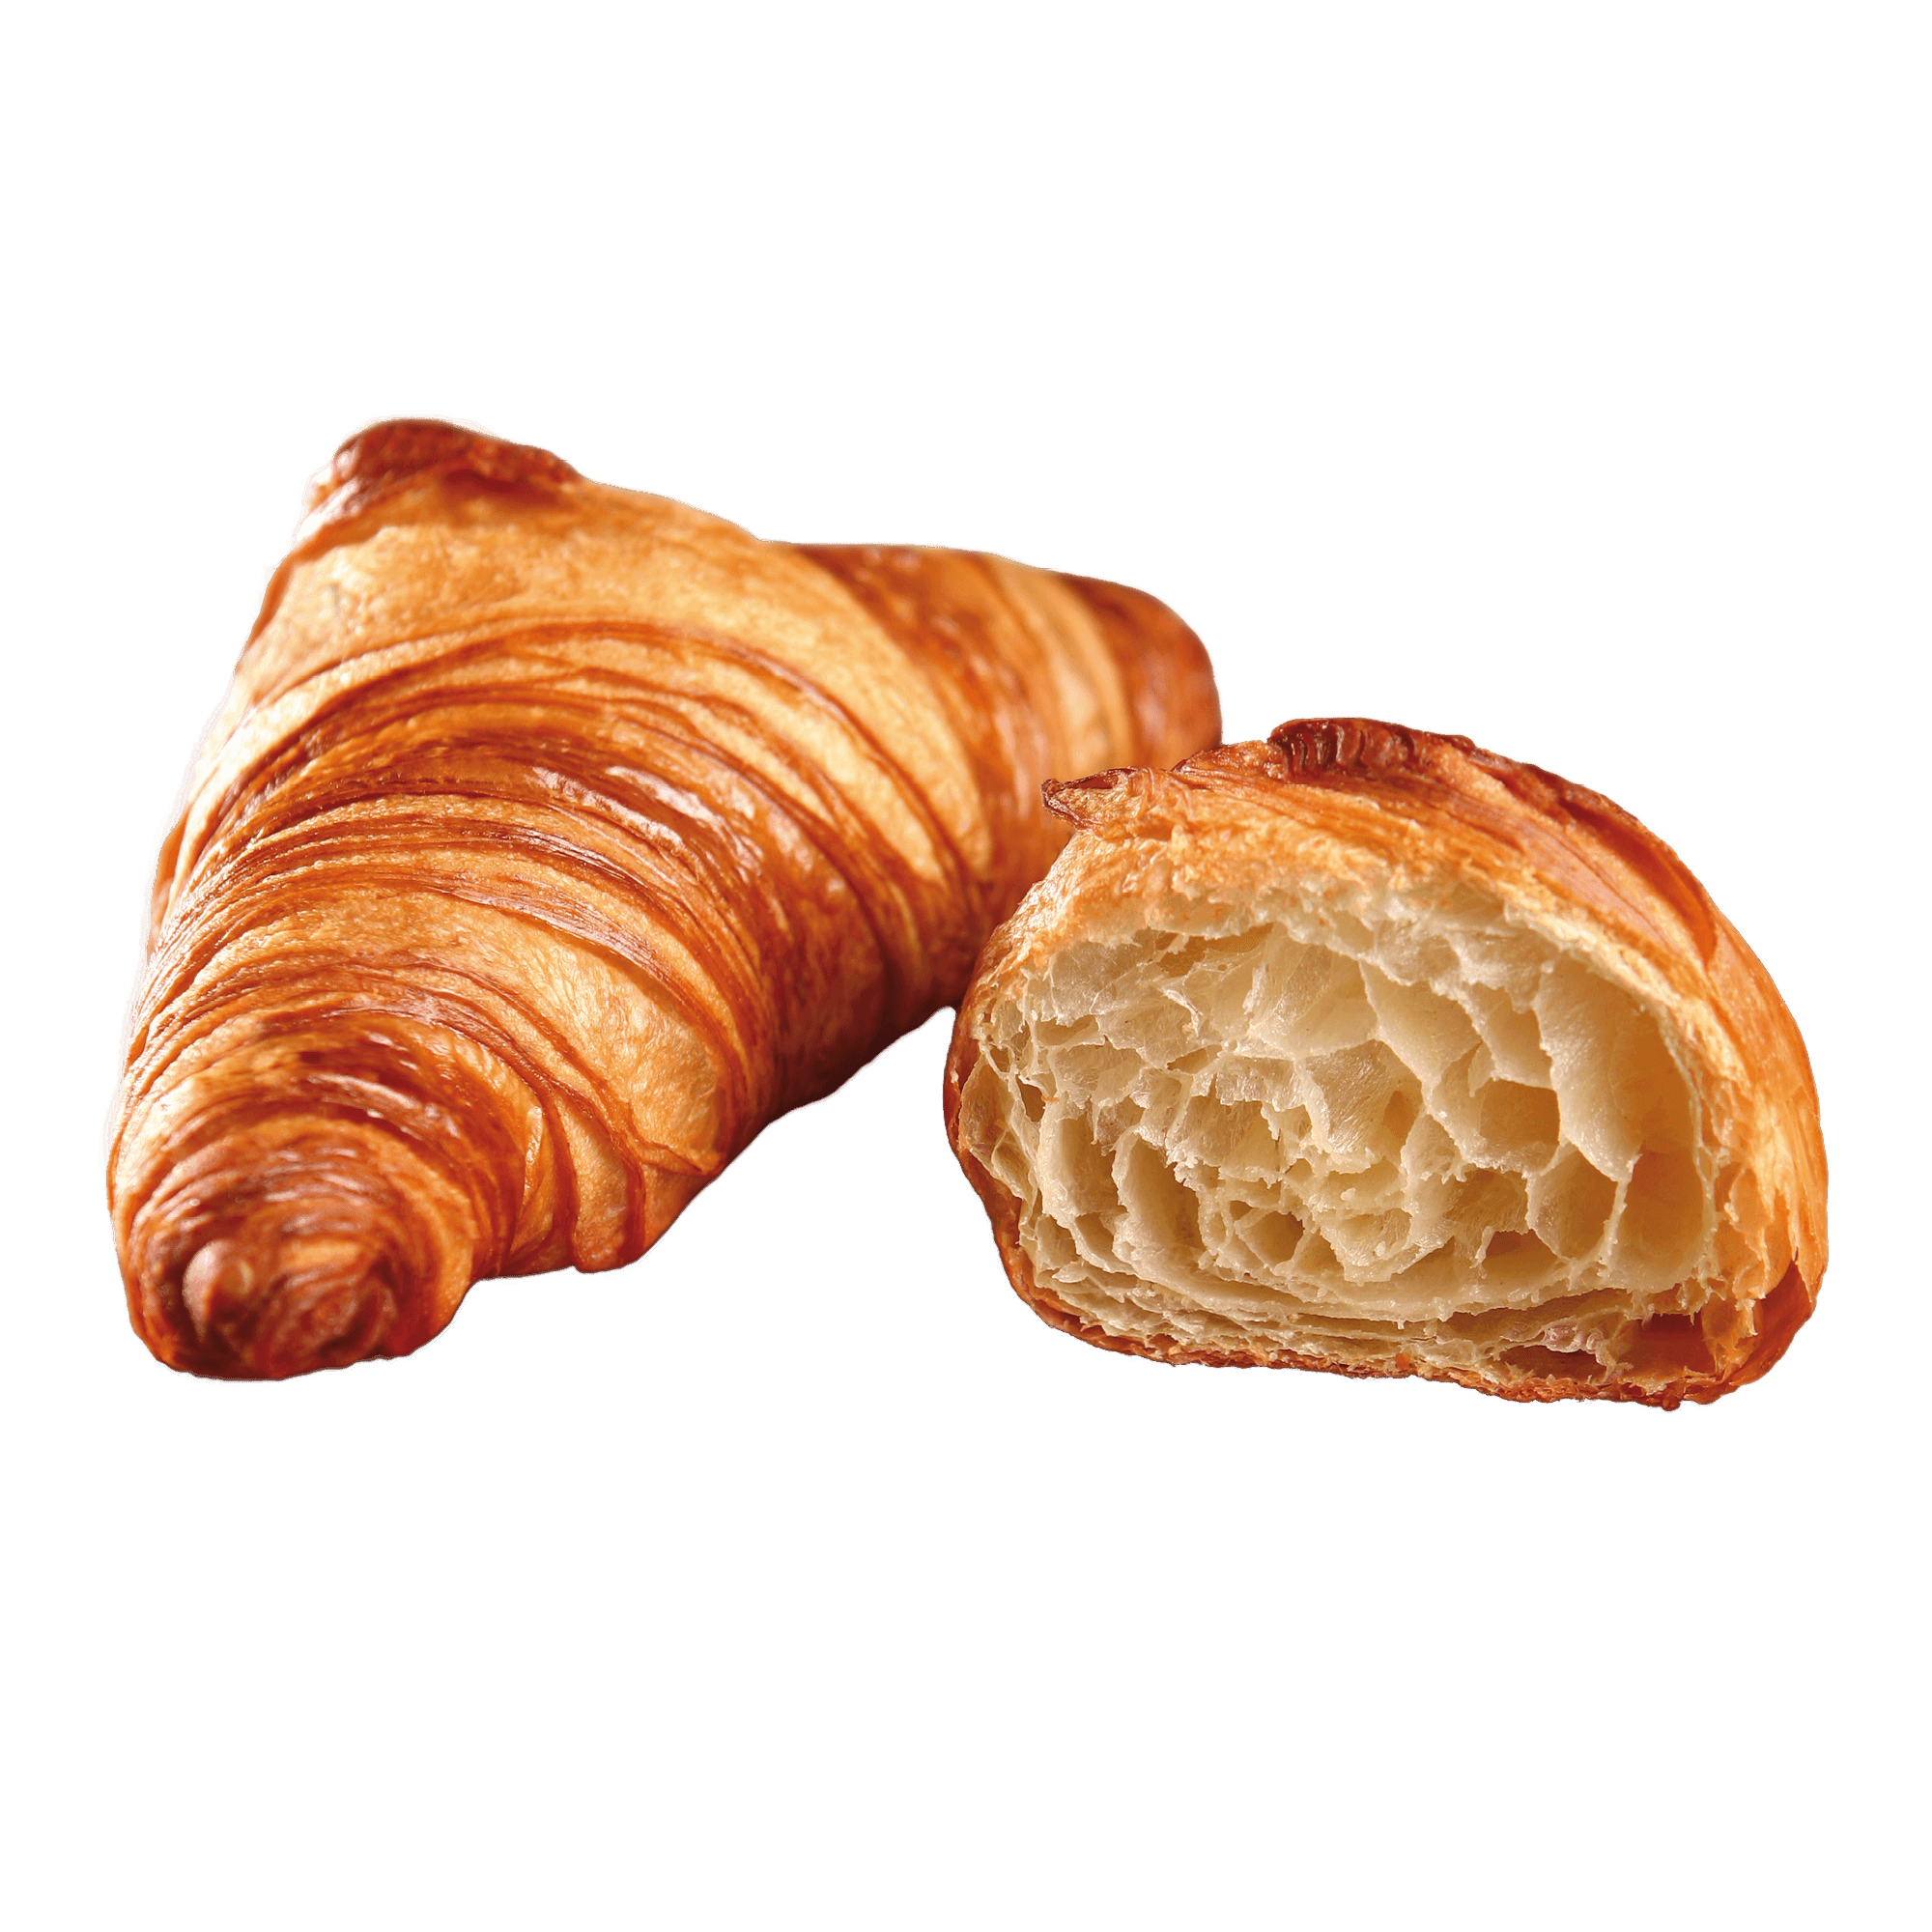 Proof and Bake Croissants — Savory Gourmet